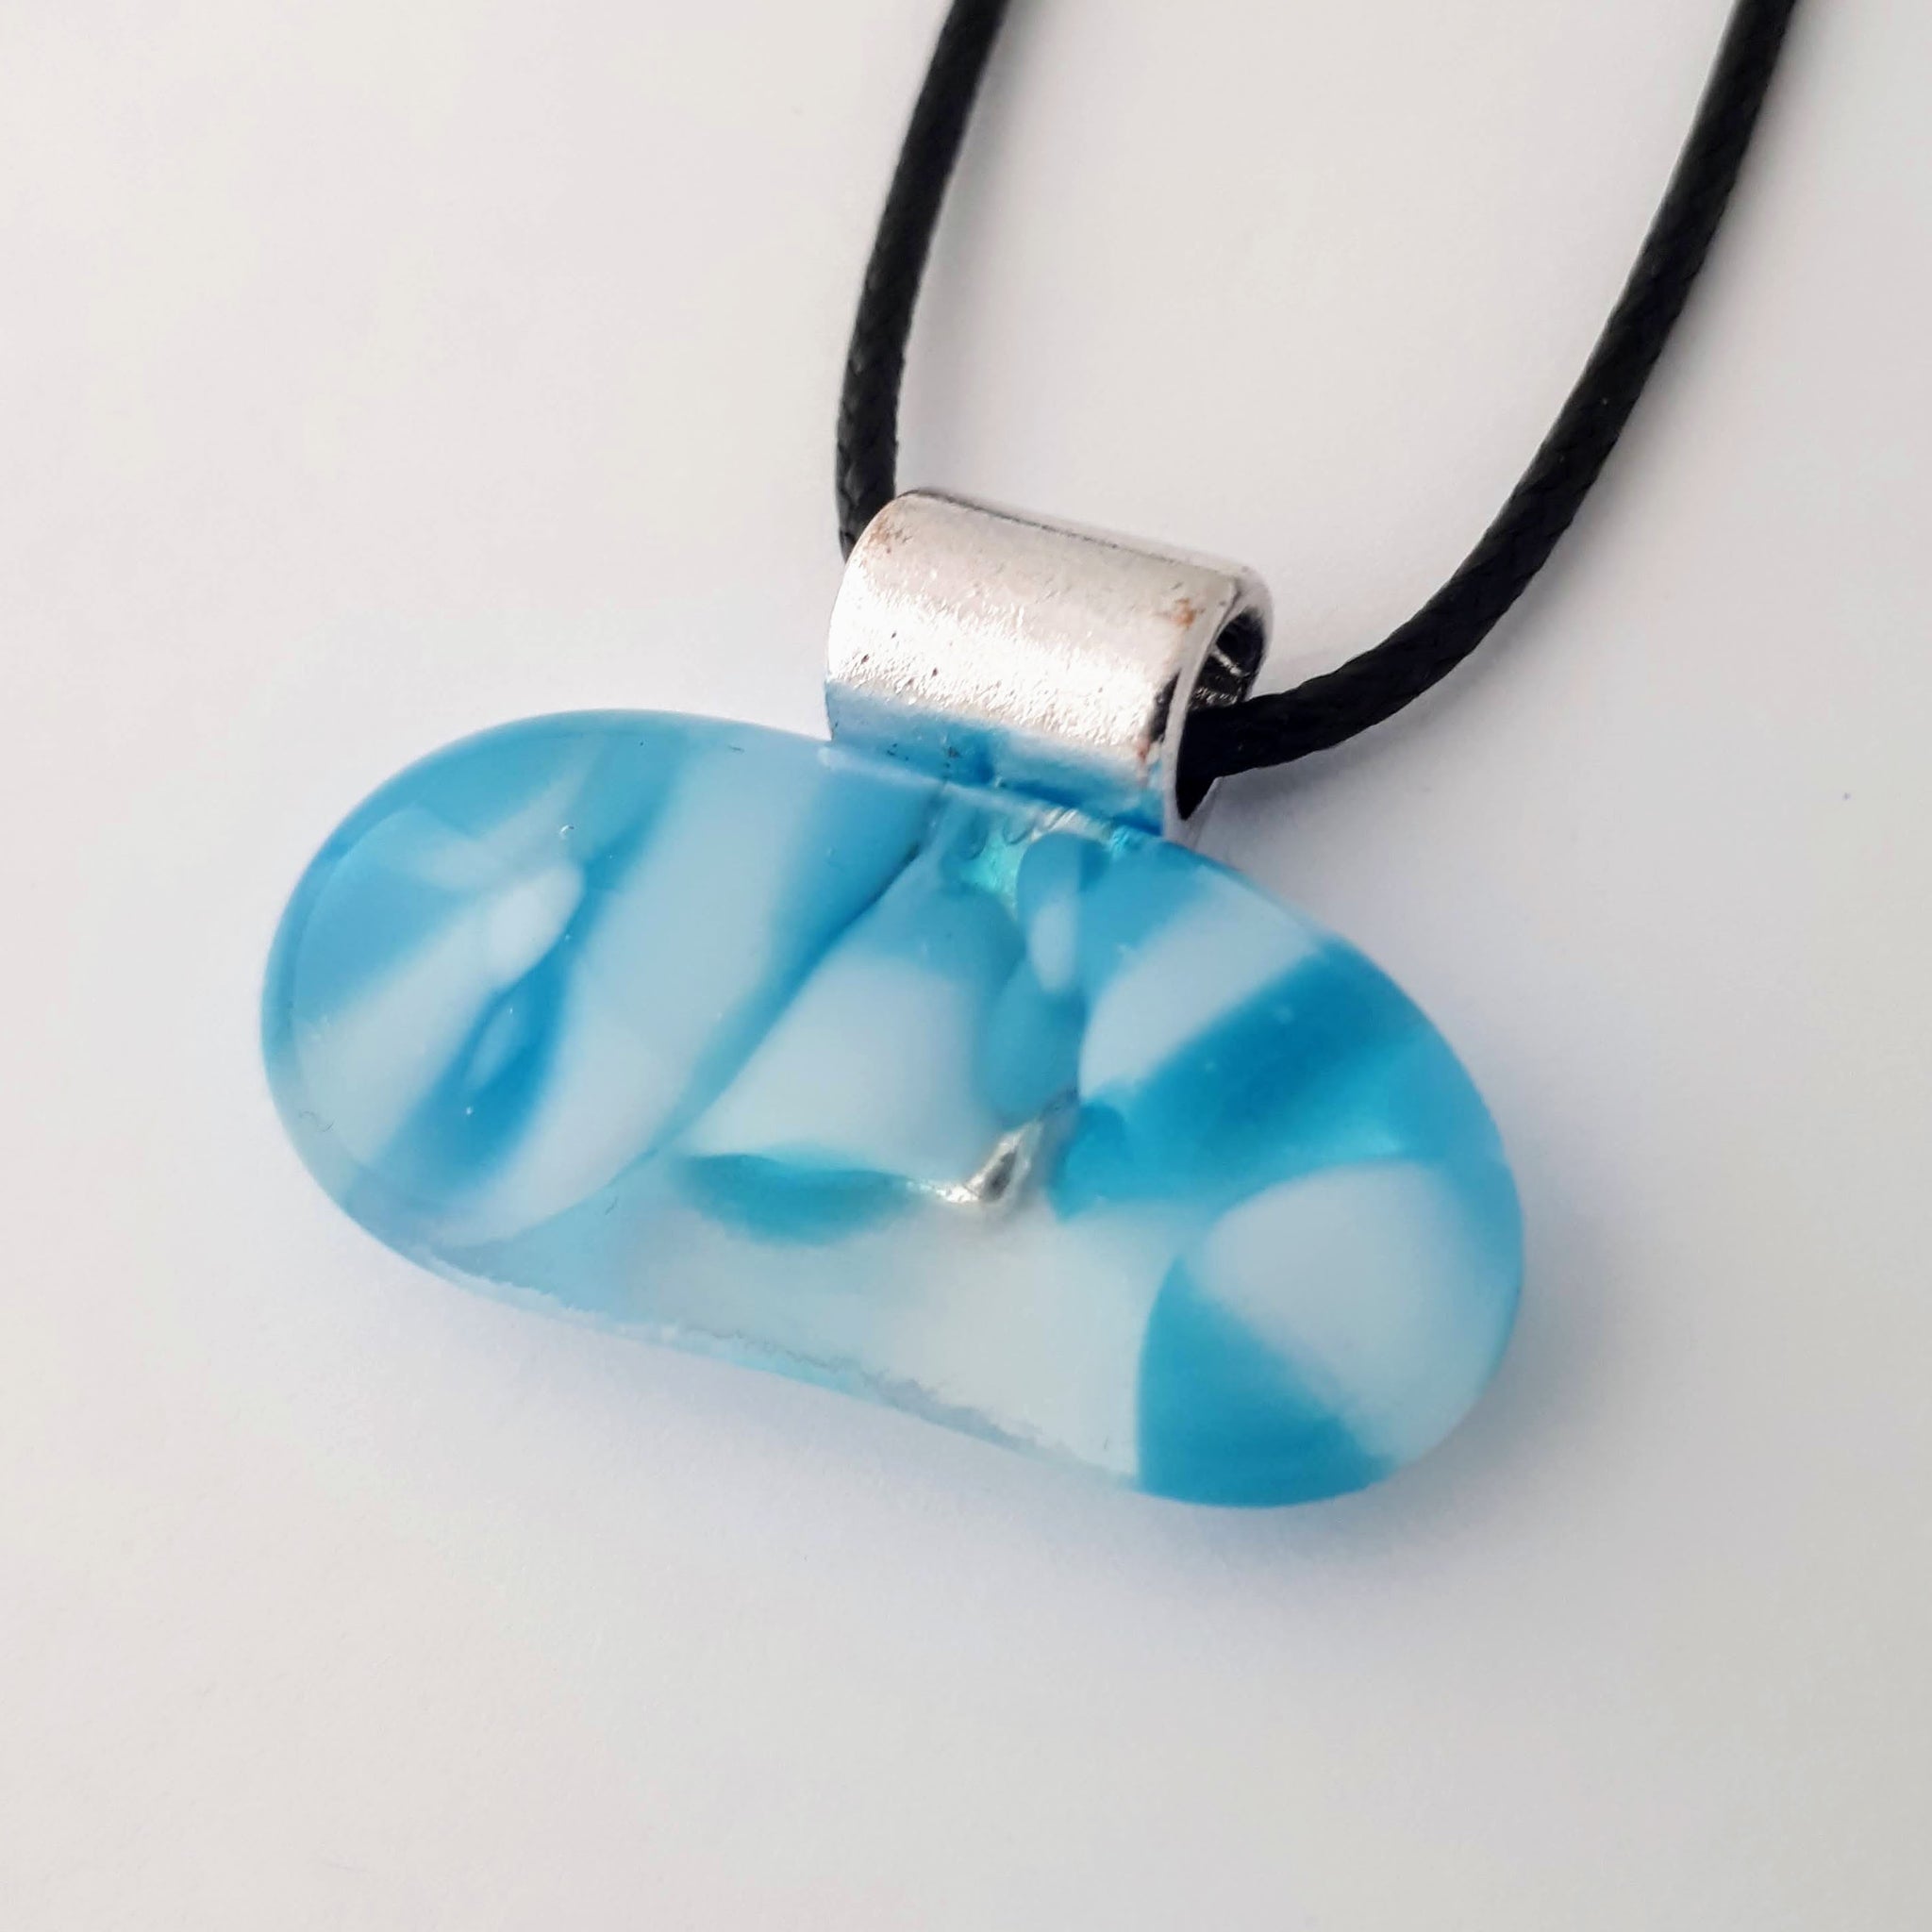 Blue and white wide oval/kidney shaped glass fused pendant with silver coloured bail and black cord on white background